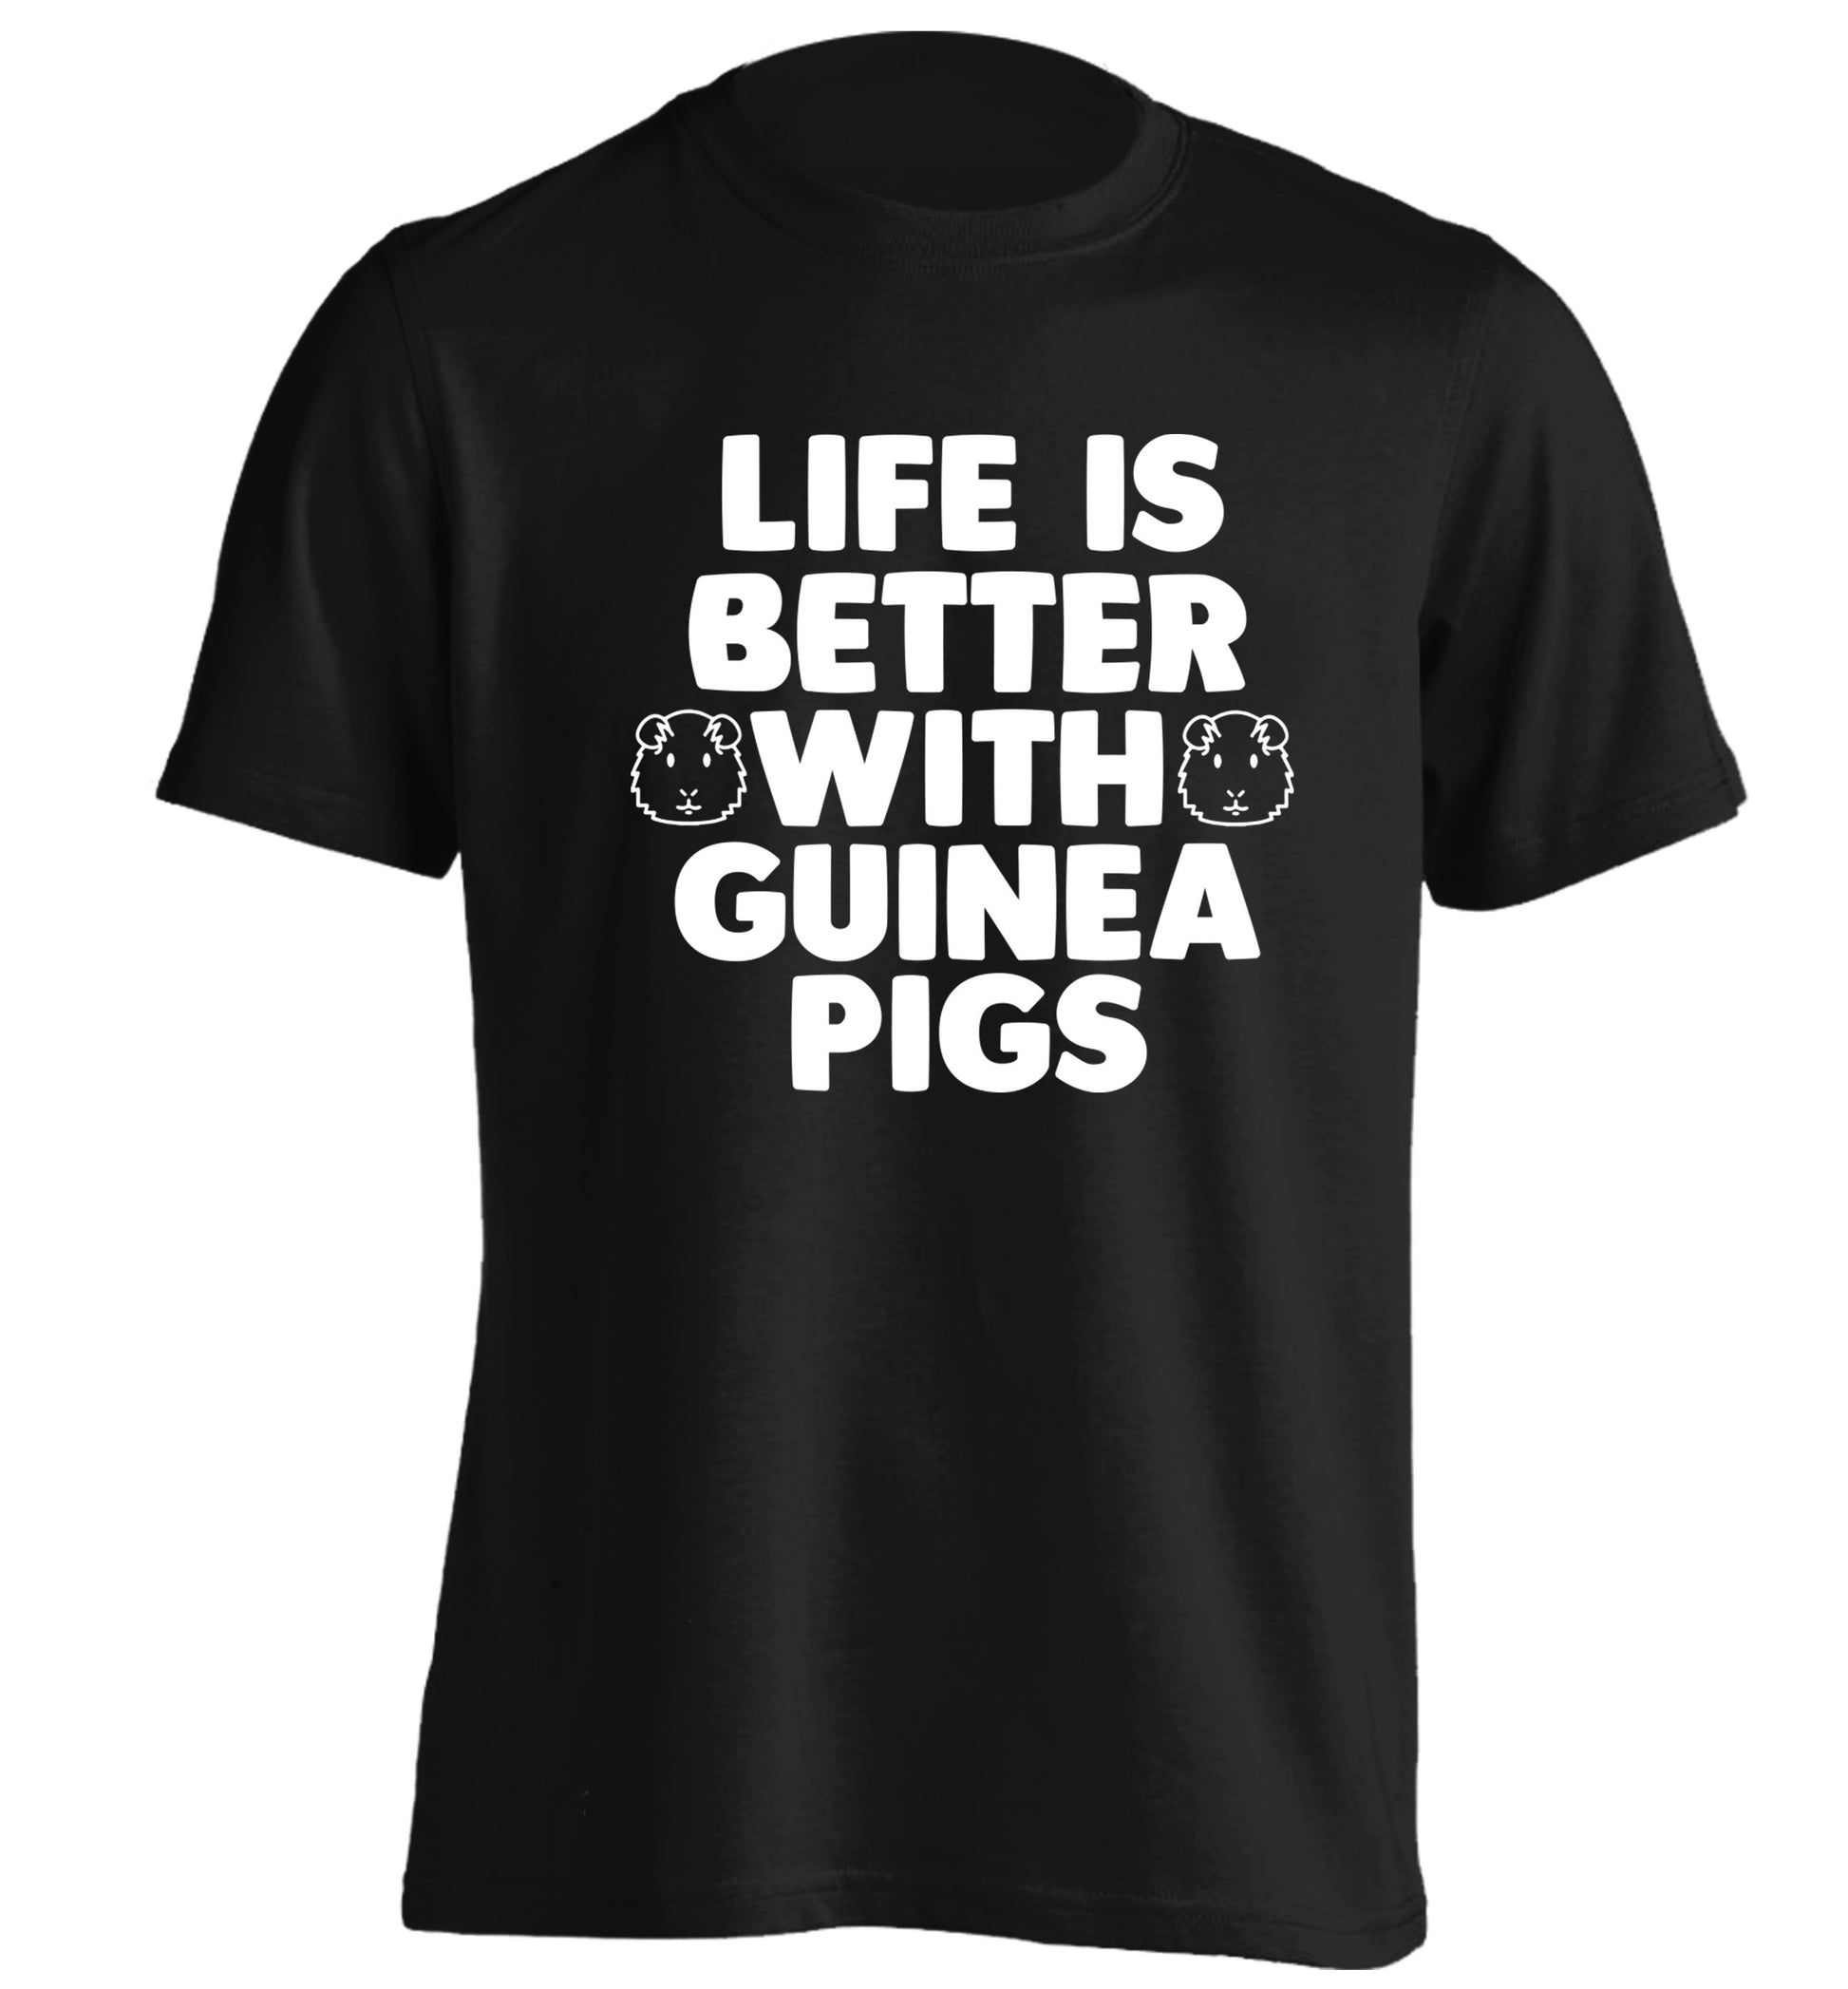 Life is better with guinea pigs adults unisex black Tshirt 2XL